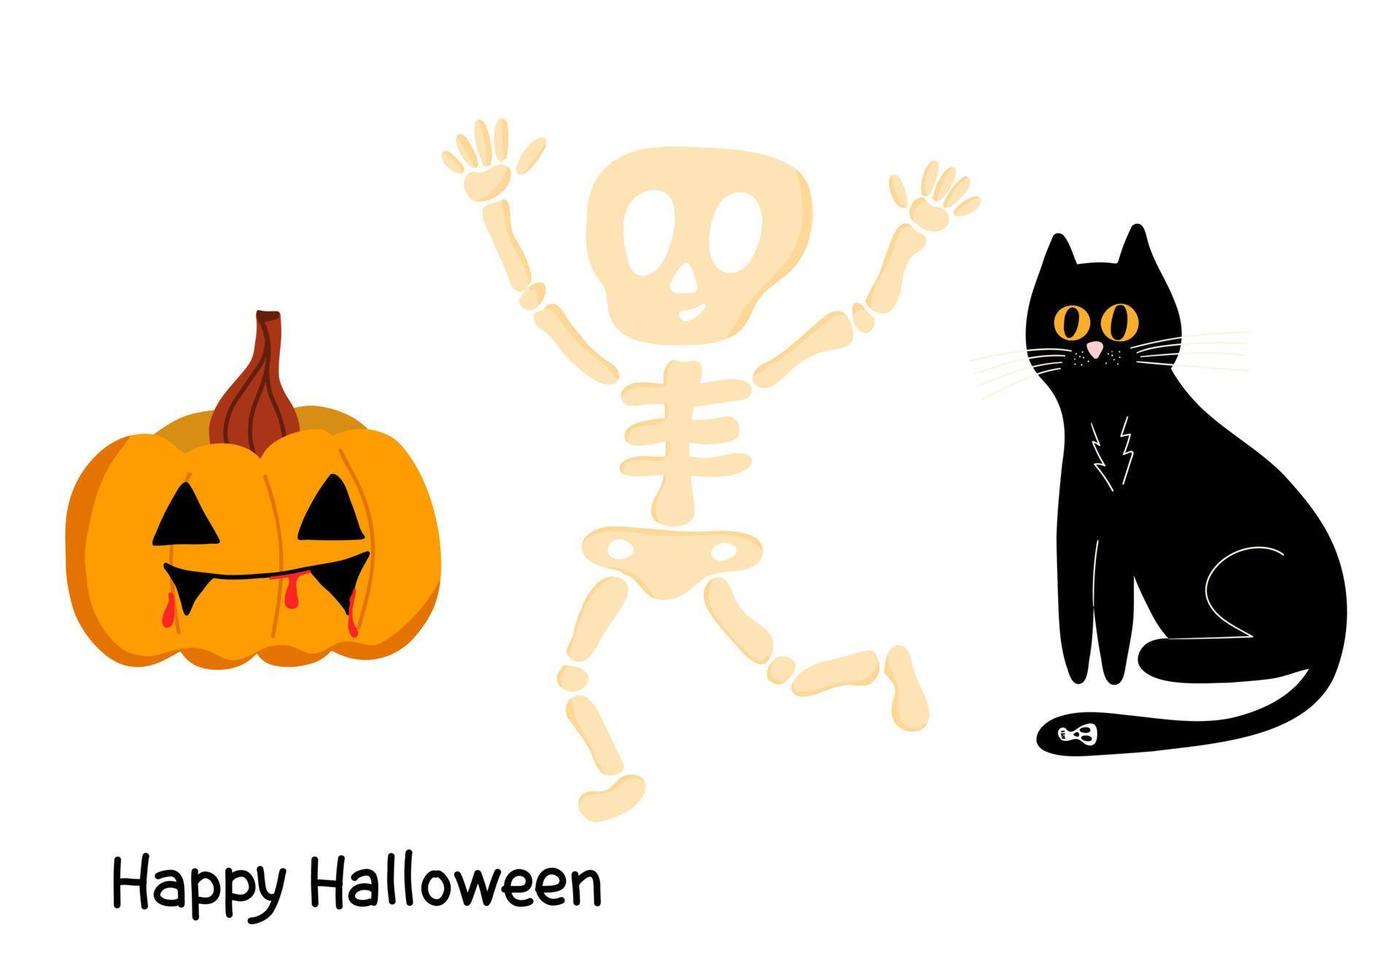 Vector set for Halloween with a black cat, a pumpkin and a funny skeleton on a white background in a flat style. Illustration for holidays, T-shirts, gift packaging, postcards, banners